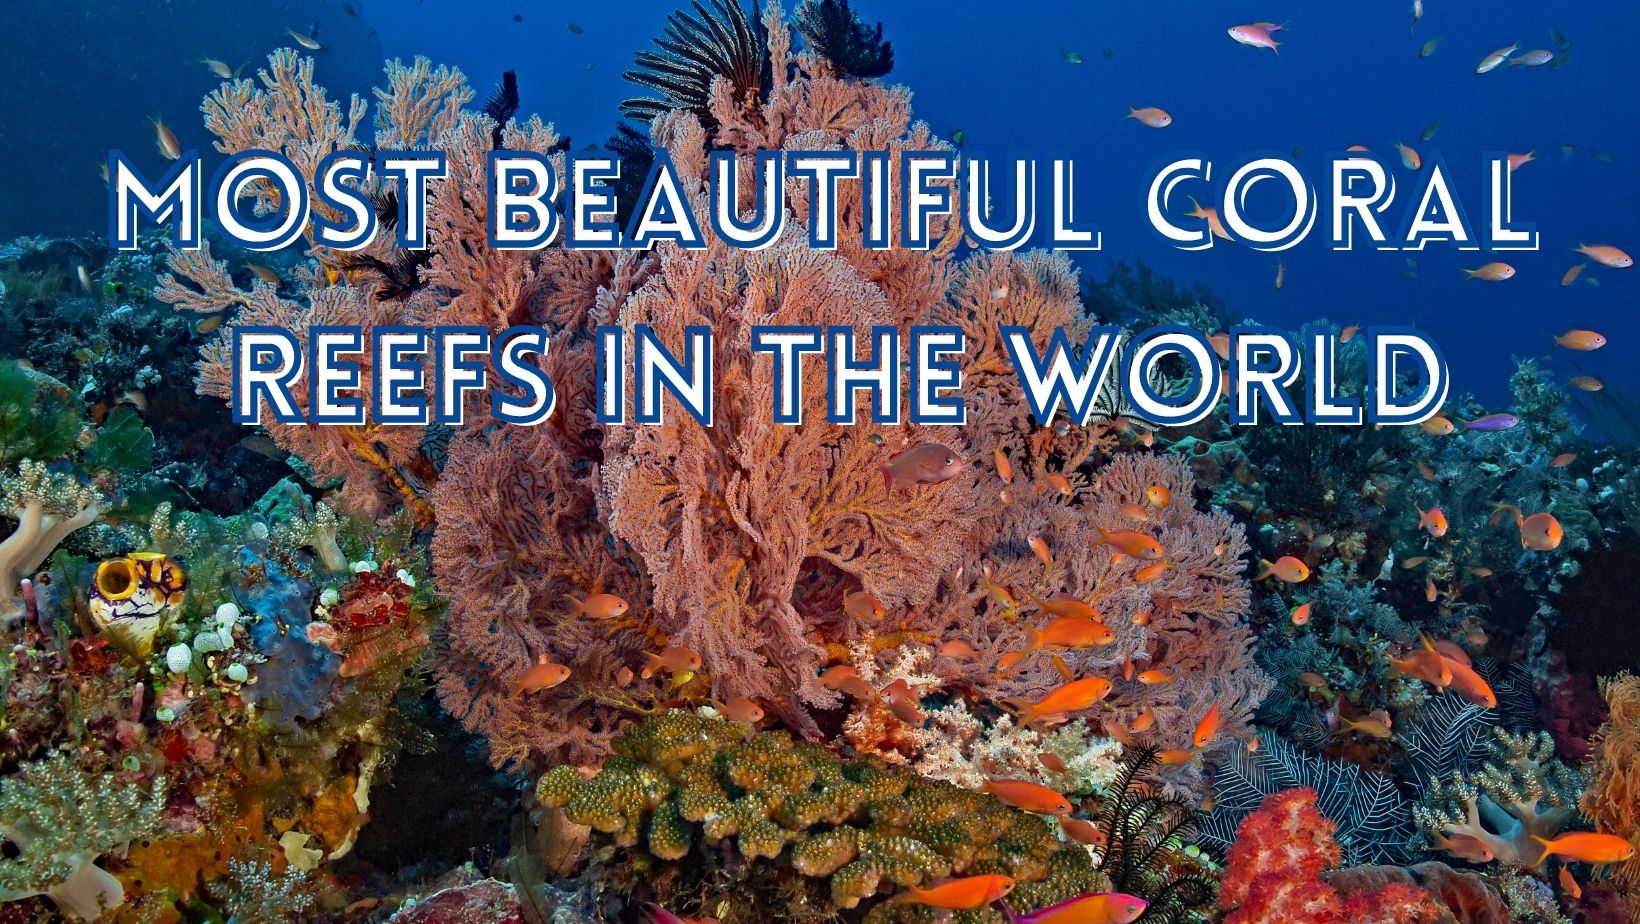 Most beautiful coral reefs in the world